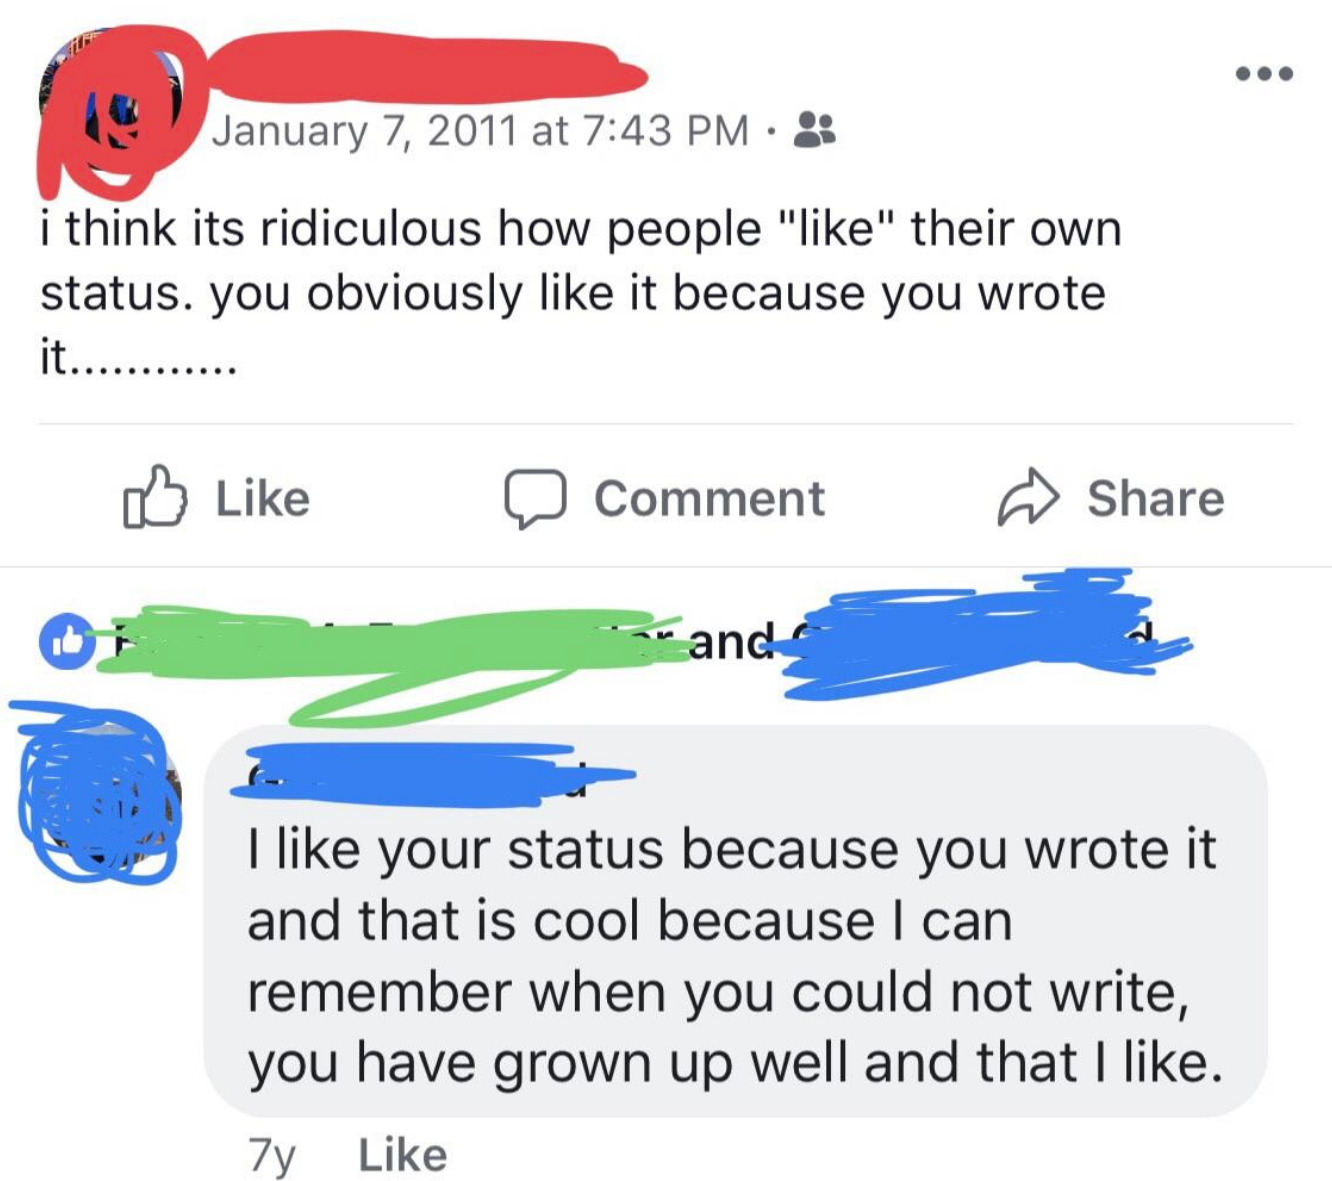 Grandpa says, I like your status because you wrote it and that is cool because I can remember when you could not write, you have grown up well and that I like